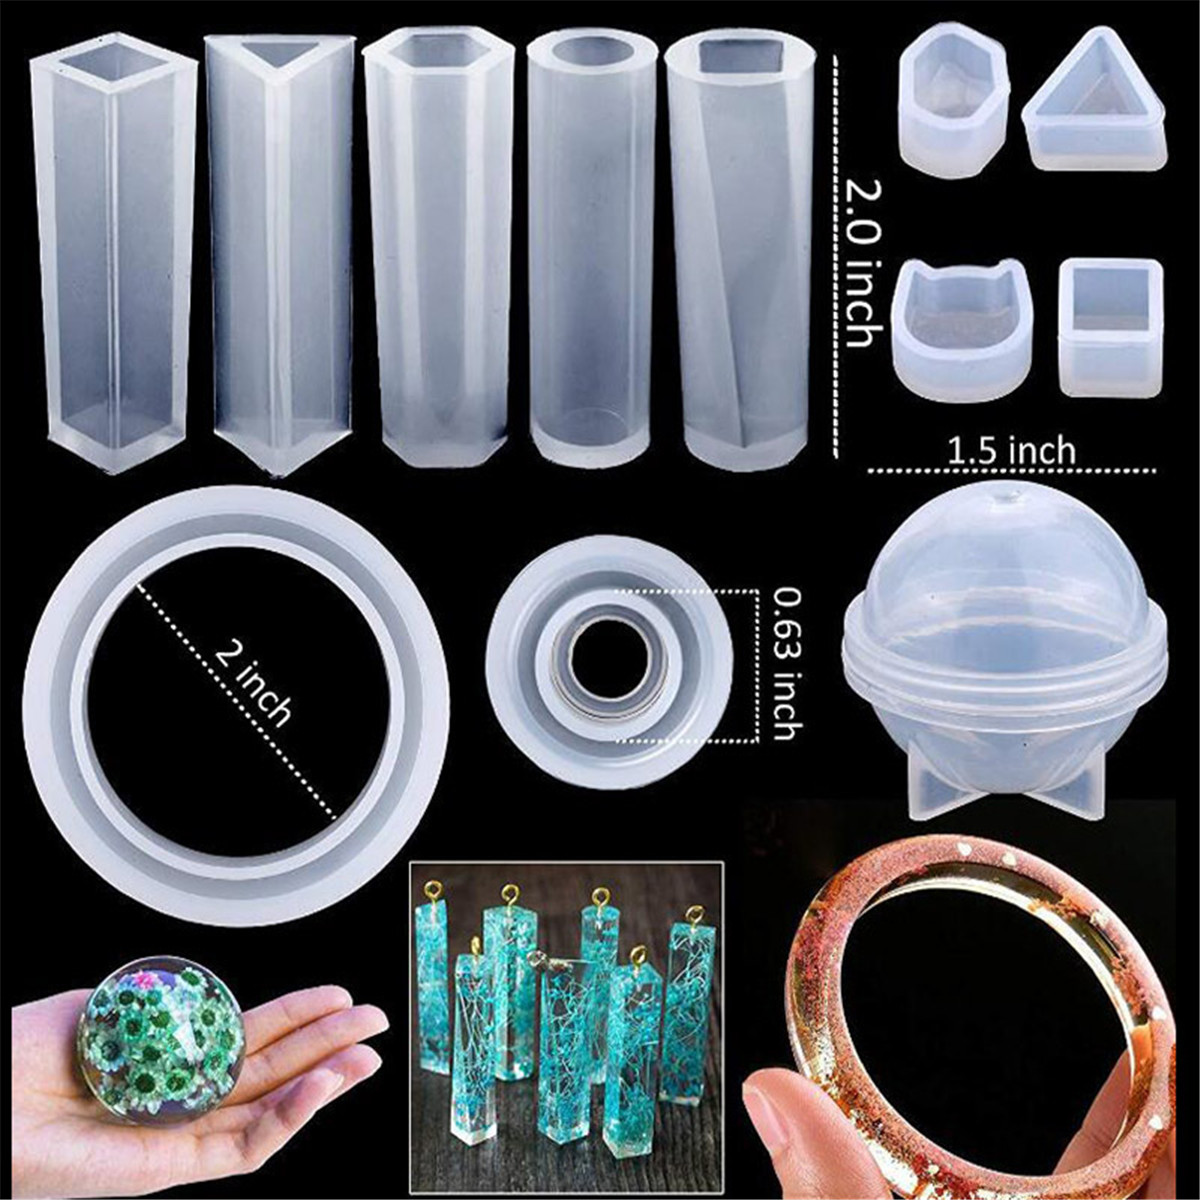 83x-Silicone-Resin-Casting-Mold-Tool-Sets-Kit-DIY-Pendant-Jewelry-Bracelet-Making-1808640-3